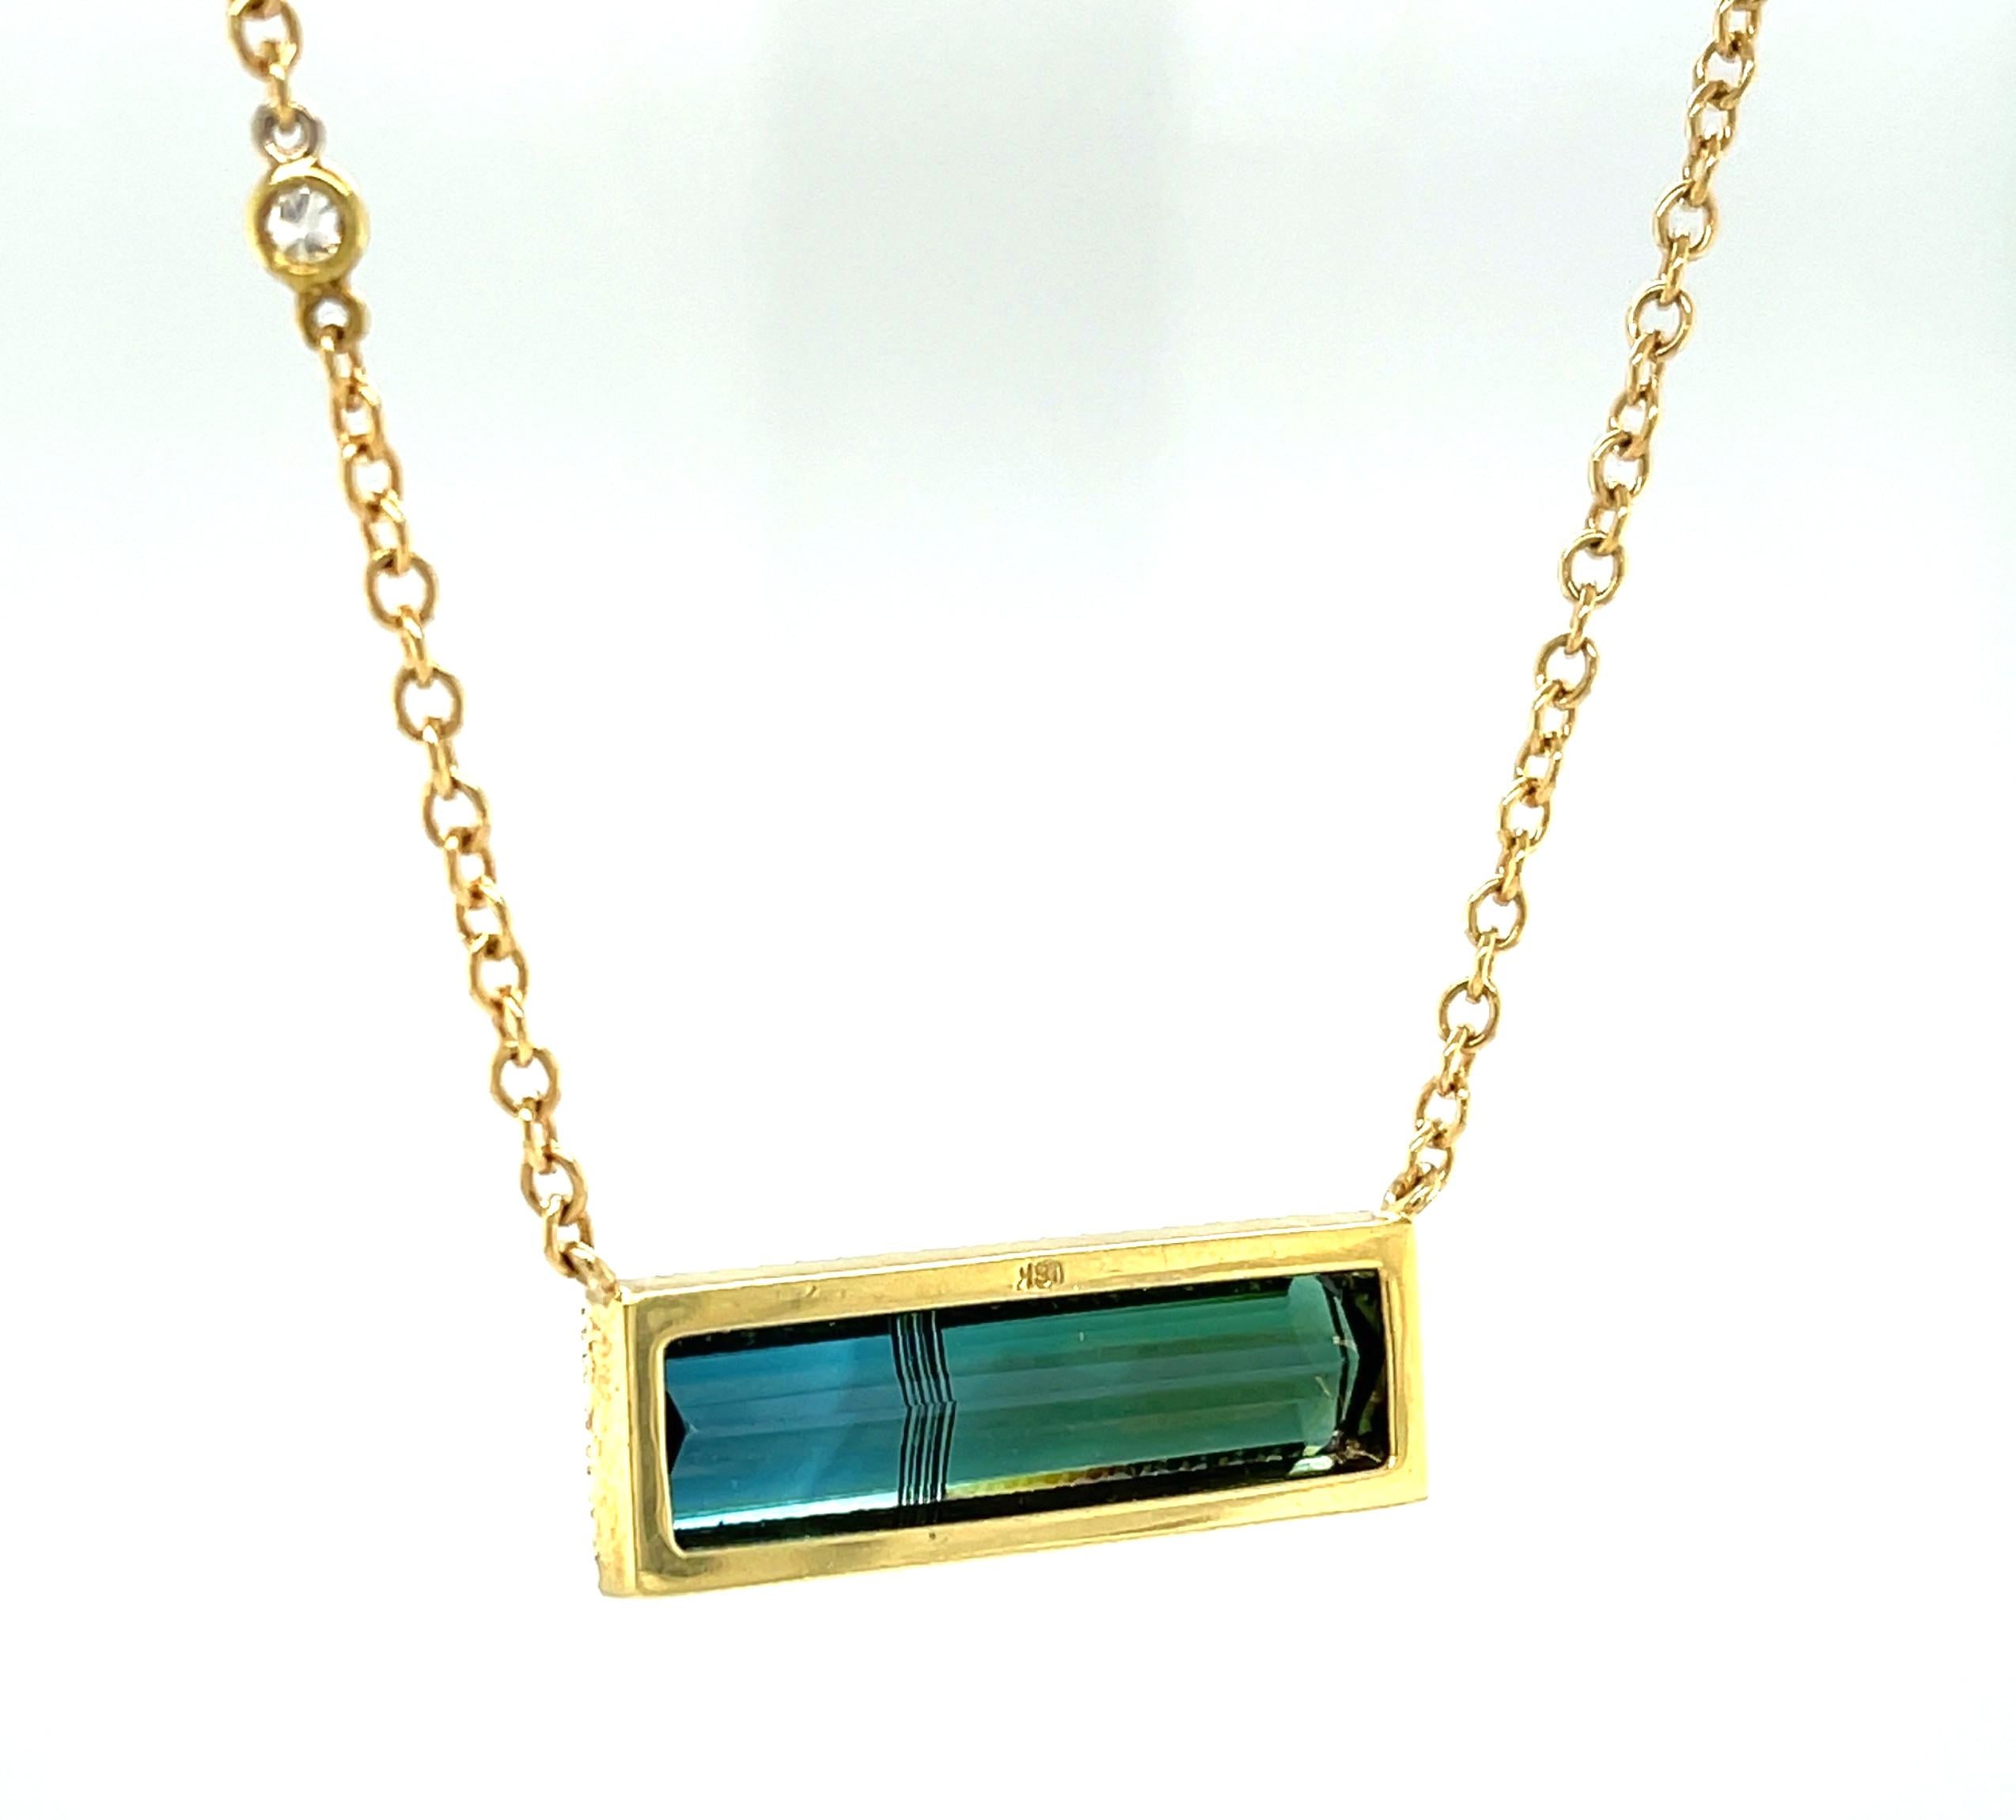 Artisan 7.58 Carat Indicolite Tourmaline and Diamond Necklace in 18k Yellow Gold For Sale